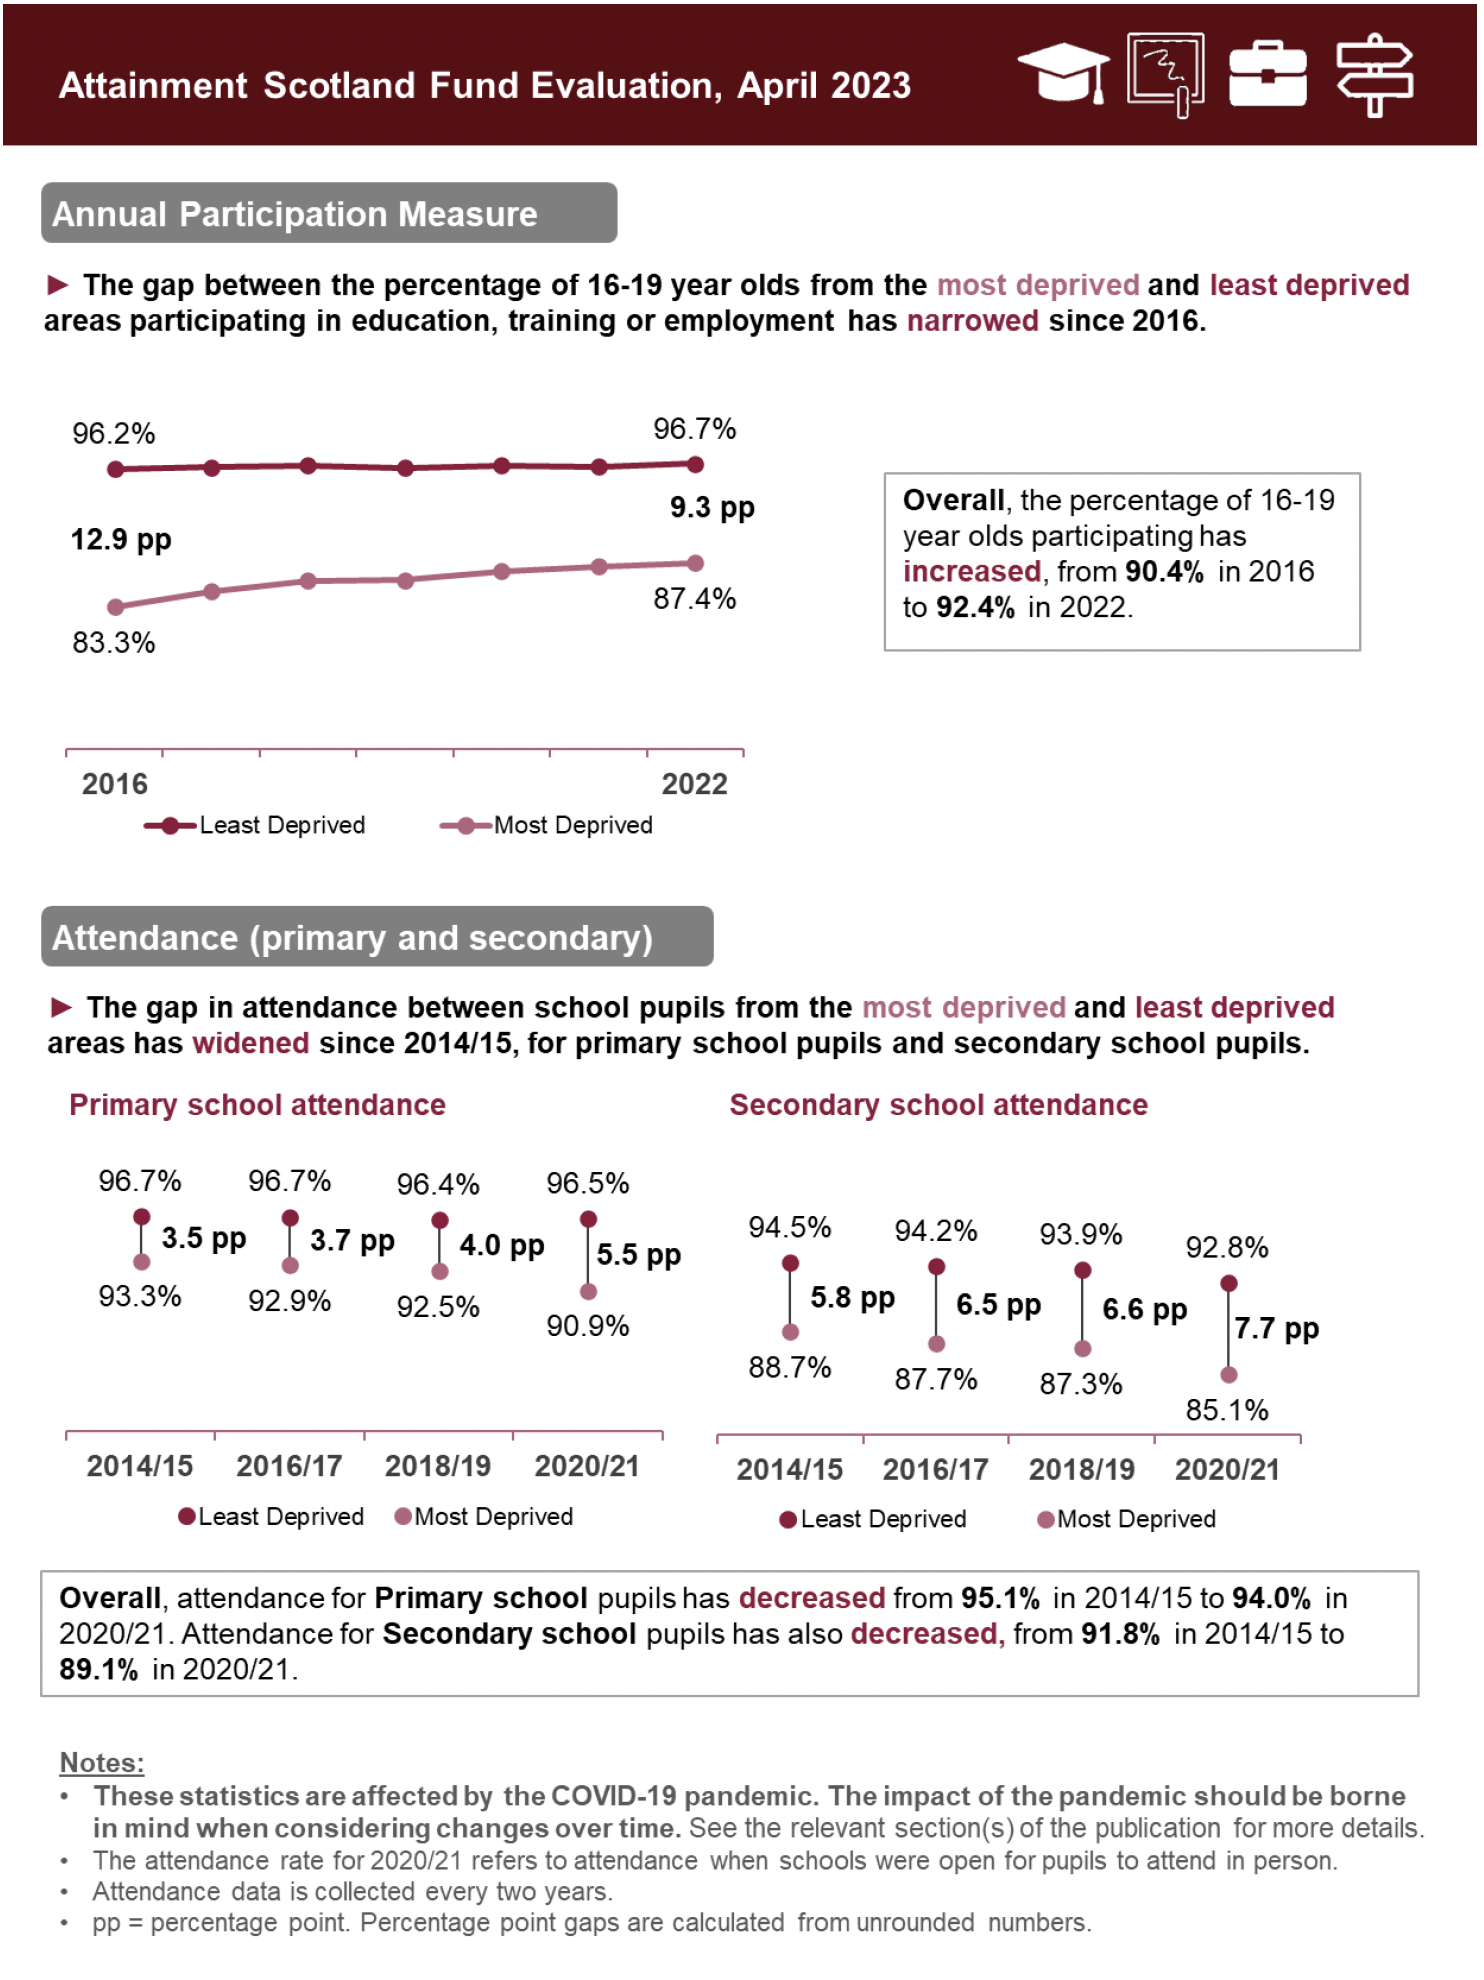 Participation in education, training or employment: the gap between 16-19 year olds from the most and least deprived areas participating narrowed from 12.9 percentage points (pp) in 2016 to 9.3pp in 2022. 
Attendance: the gap between Primary school pupils from the most and least deprived areas widened from 3.5pp in 2014/15 to 5.5pp in 2020/21. For Secondary school pupils it widened from 5.8pp in 2014/15 to 7.7pp in 2020/21. 
These statistics are affected by the COVID-19 pandemic. The impact of the pandemic should be borne in mind when considering changes over time. See the relevant section(s) of the publication for more details. The attendance rate for 2020/21 refers to attendance when schools were open for pupils to attend in person. Attendance data is collected every two years; data for 2021/22 are not available. Pp gaps are calculated from unrounded numbers. 